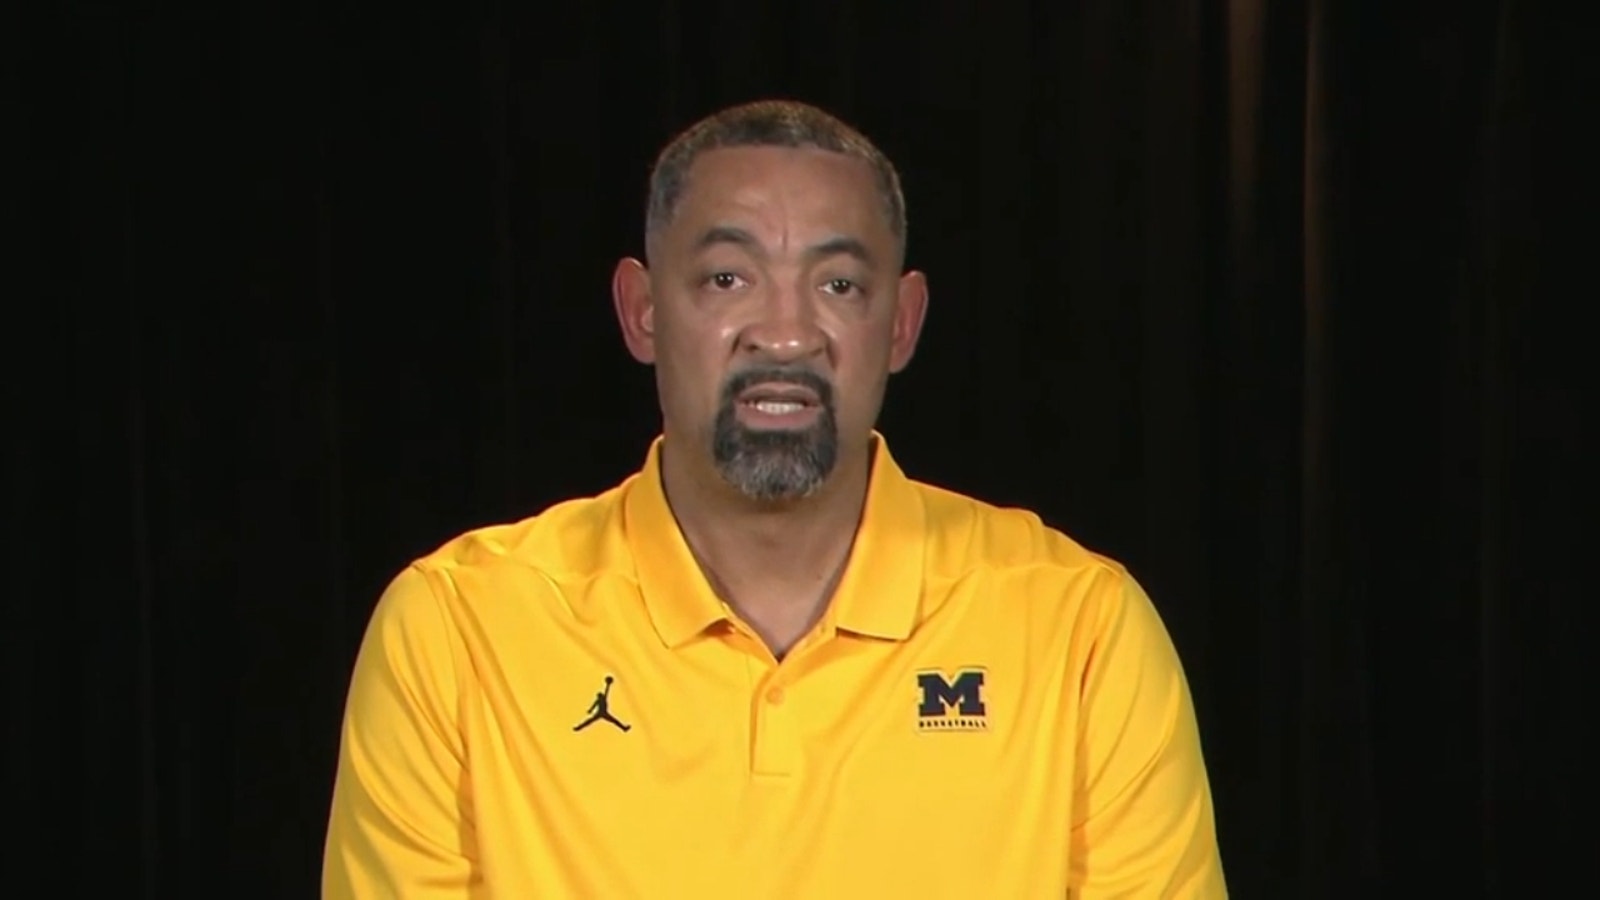 Juwan Howard on Michigan standing united with Michigan State: 'It's about the entire state pulling together'